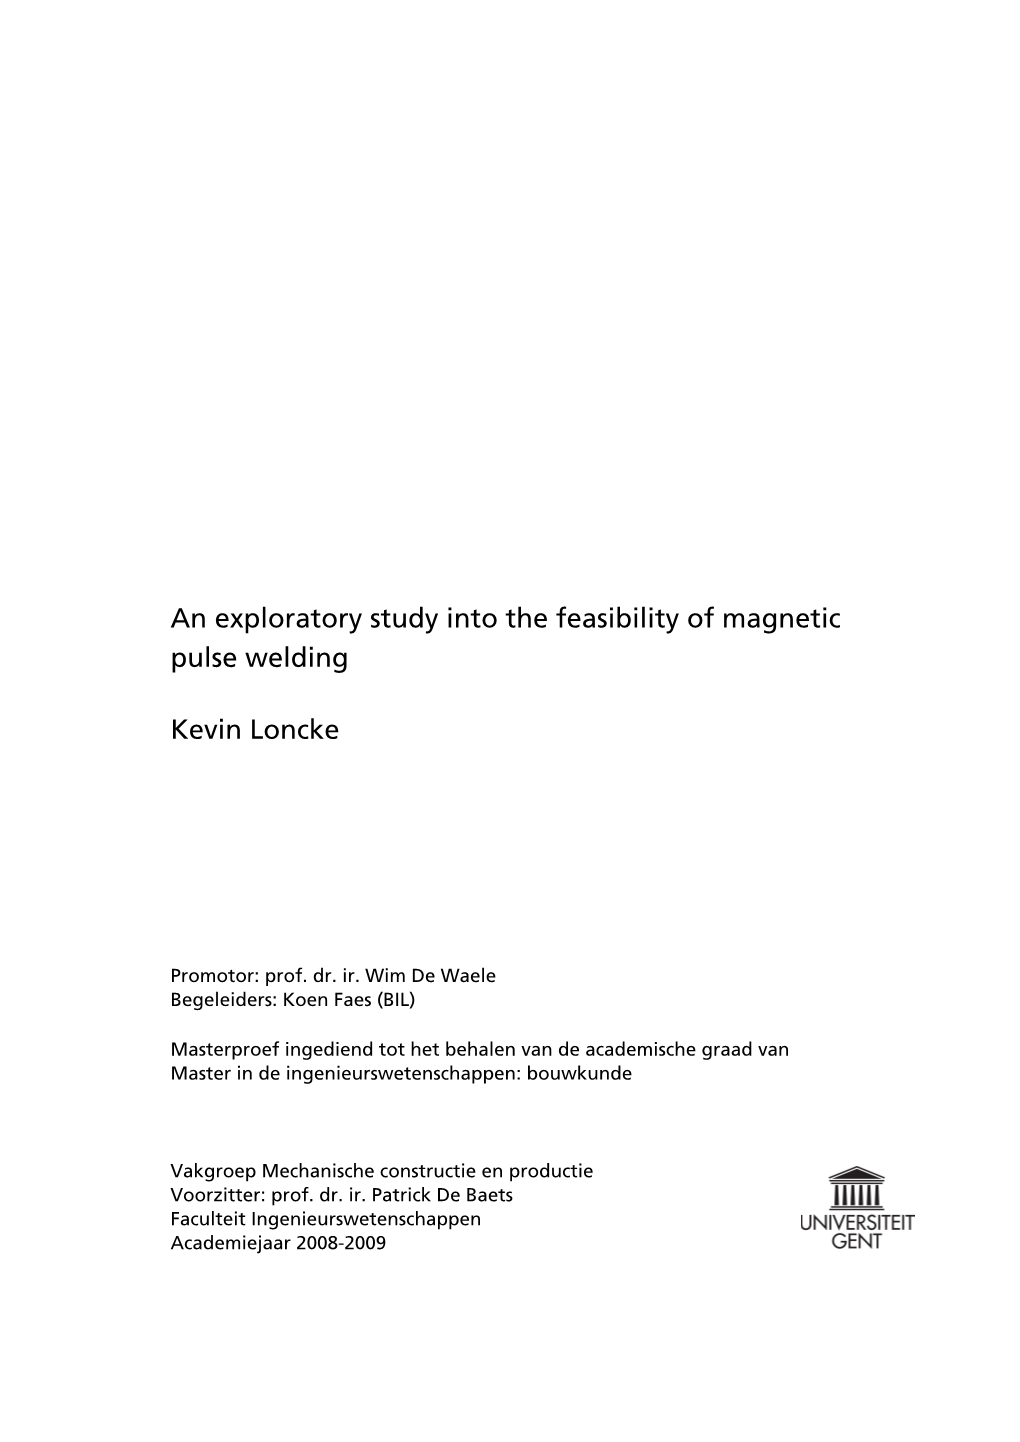 An Exploratory Study Into the Feasibility of Magnetic Pulse Welding